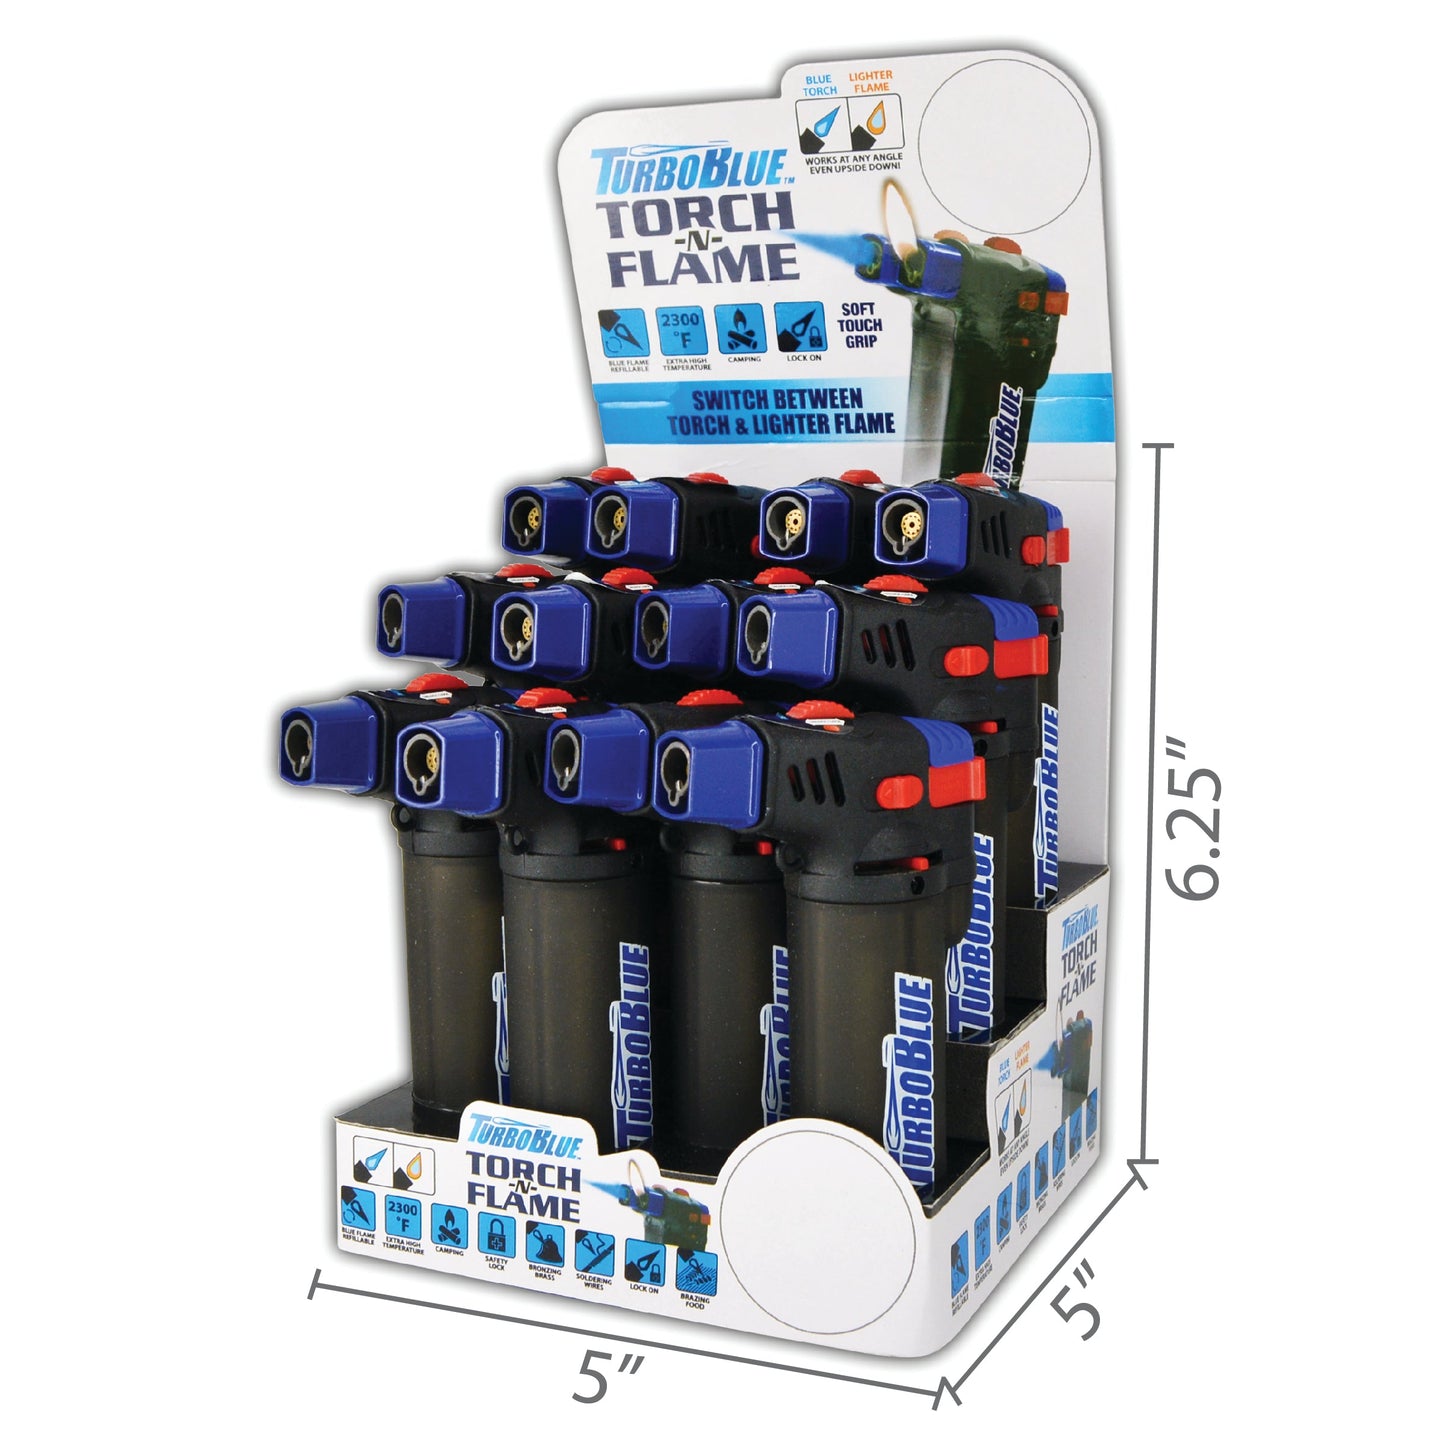 ITEM NUMBER 025557 TWO FLAME TB XXL LIGHTER 12 PIECES PER DISPLAY